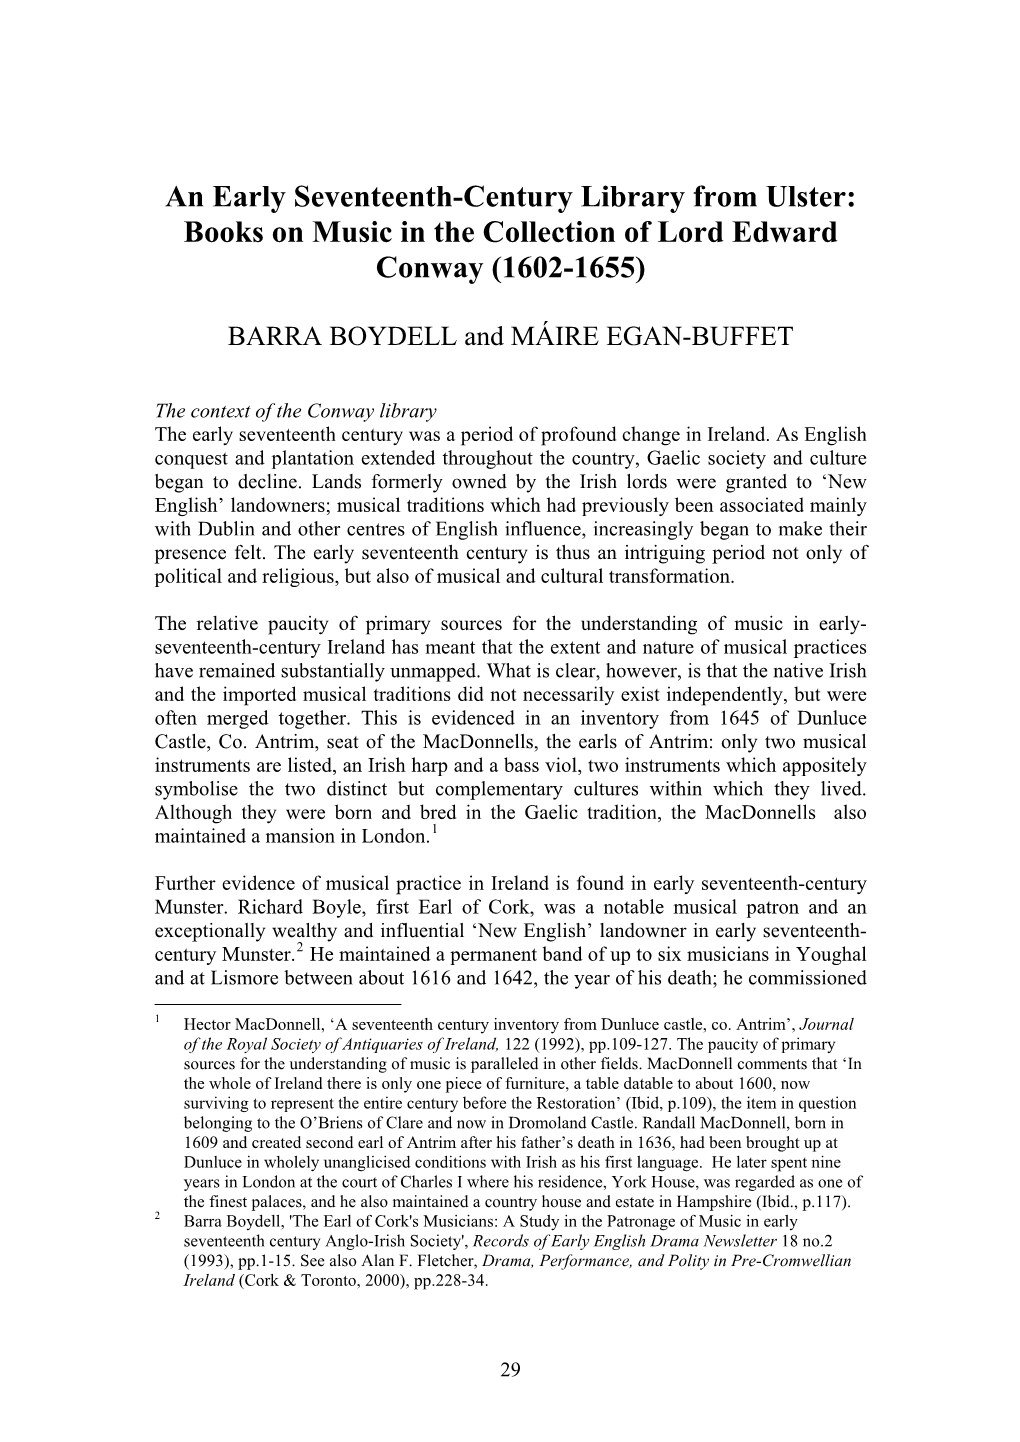 An Early Seventeenth-Century Library from Ulster: Books on Music in the Collection of Lord Edward Conway (1602-1655)